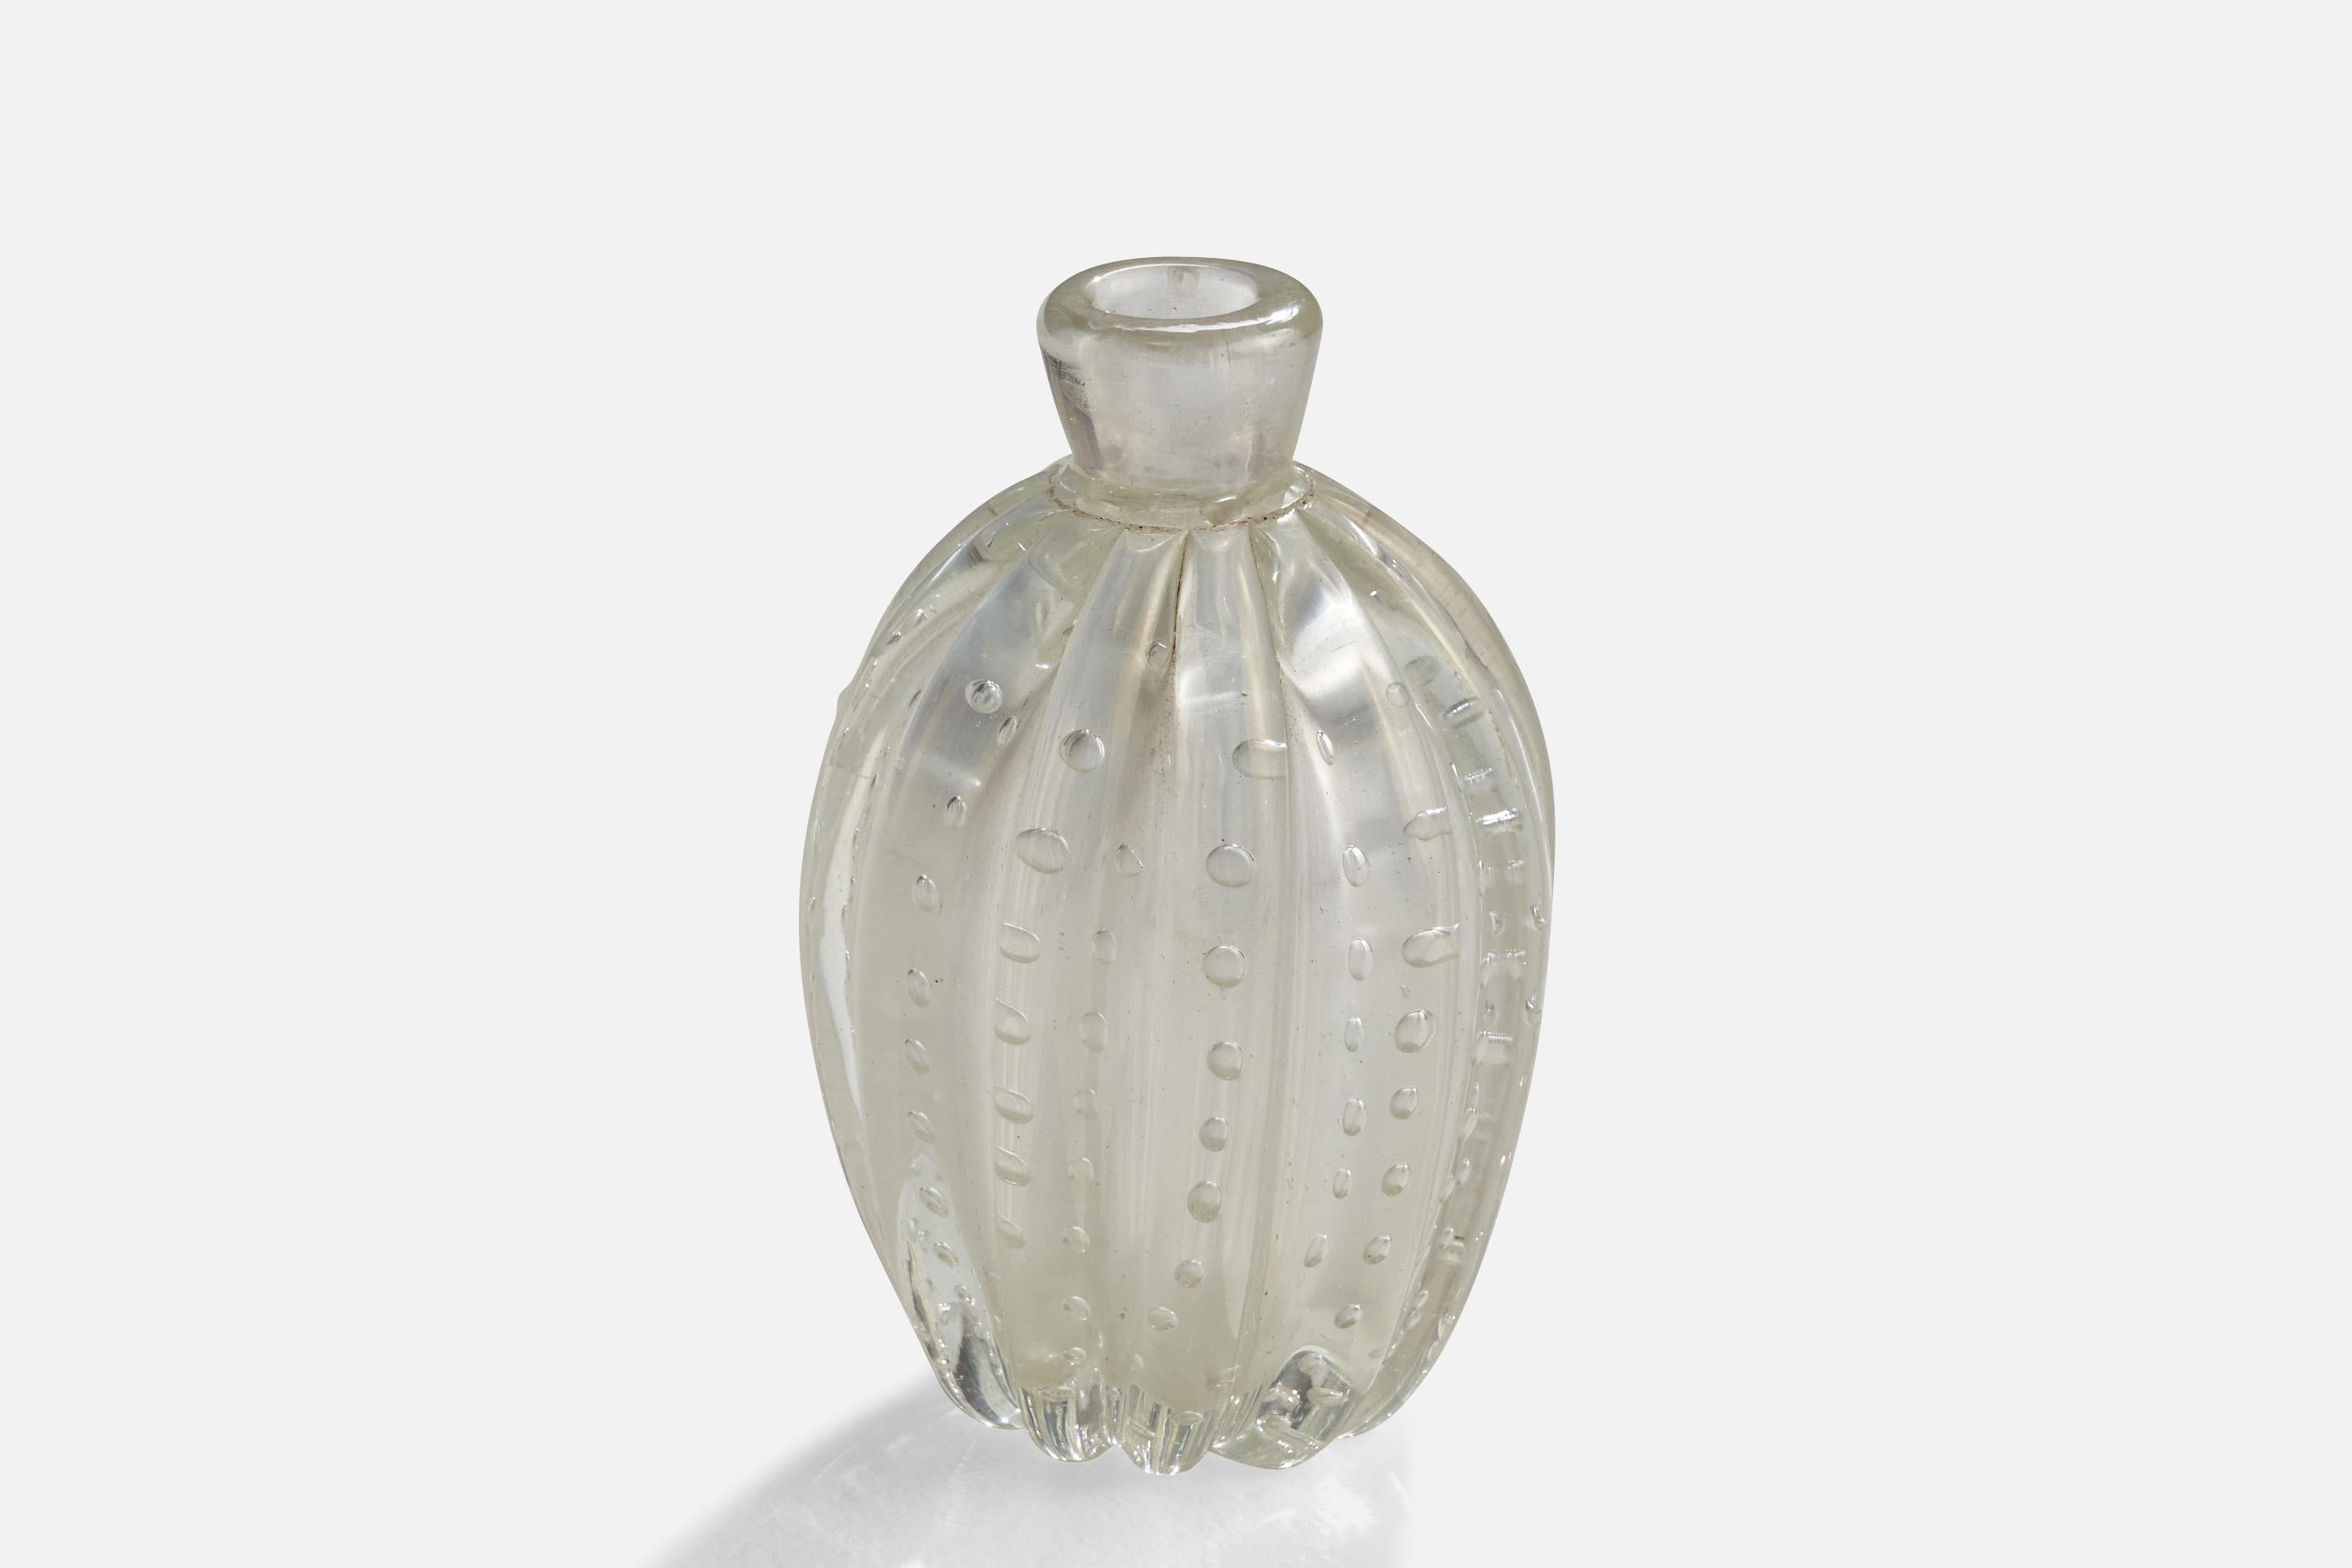 A fluted blown glass vase designed and produced in Murano, Italy, c. 1940s.